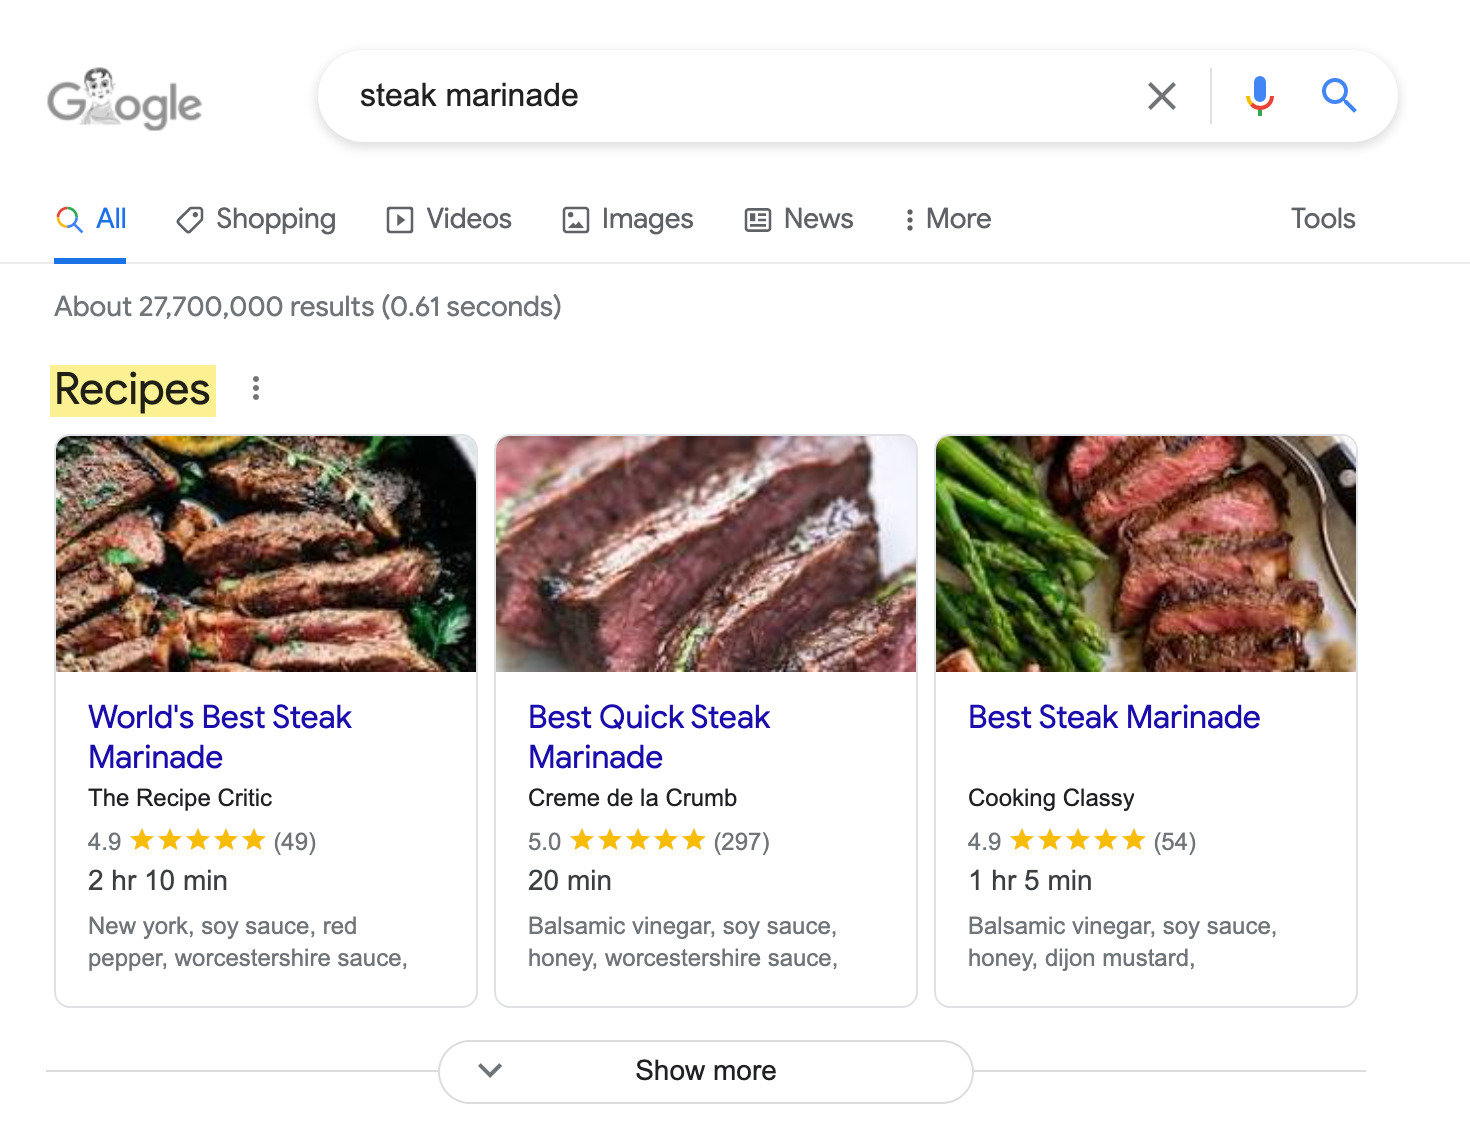 Google search results for "steak marinade" 